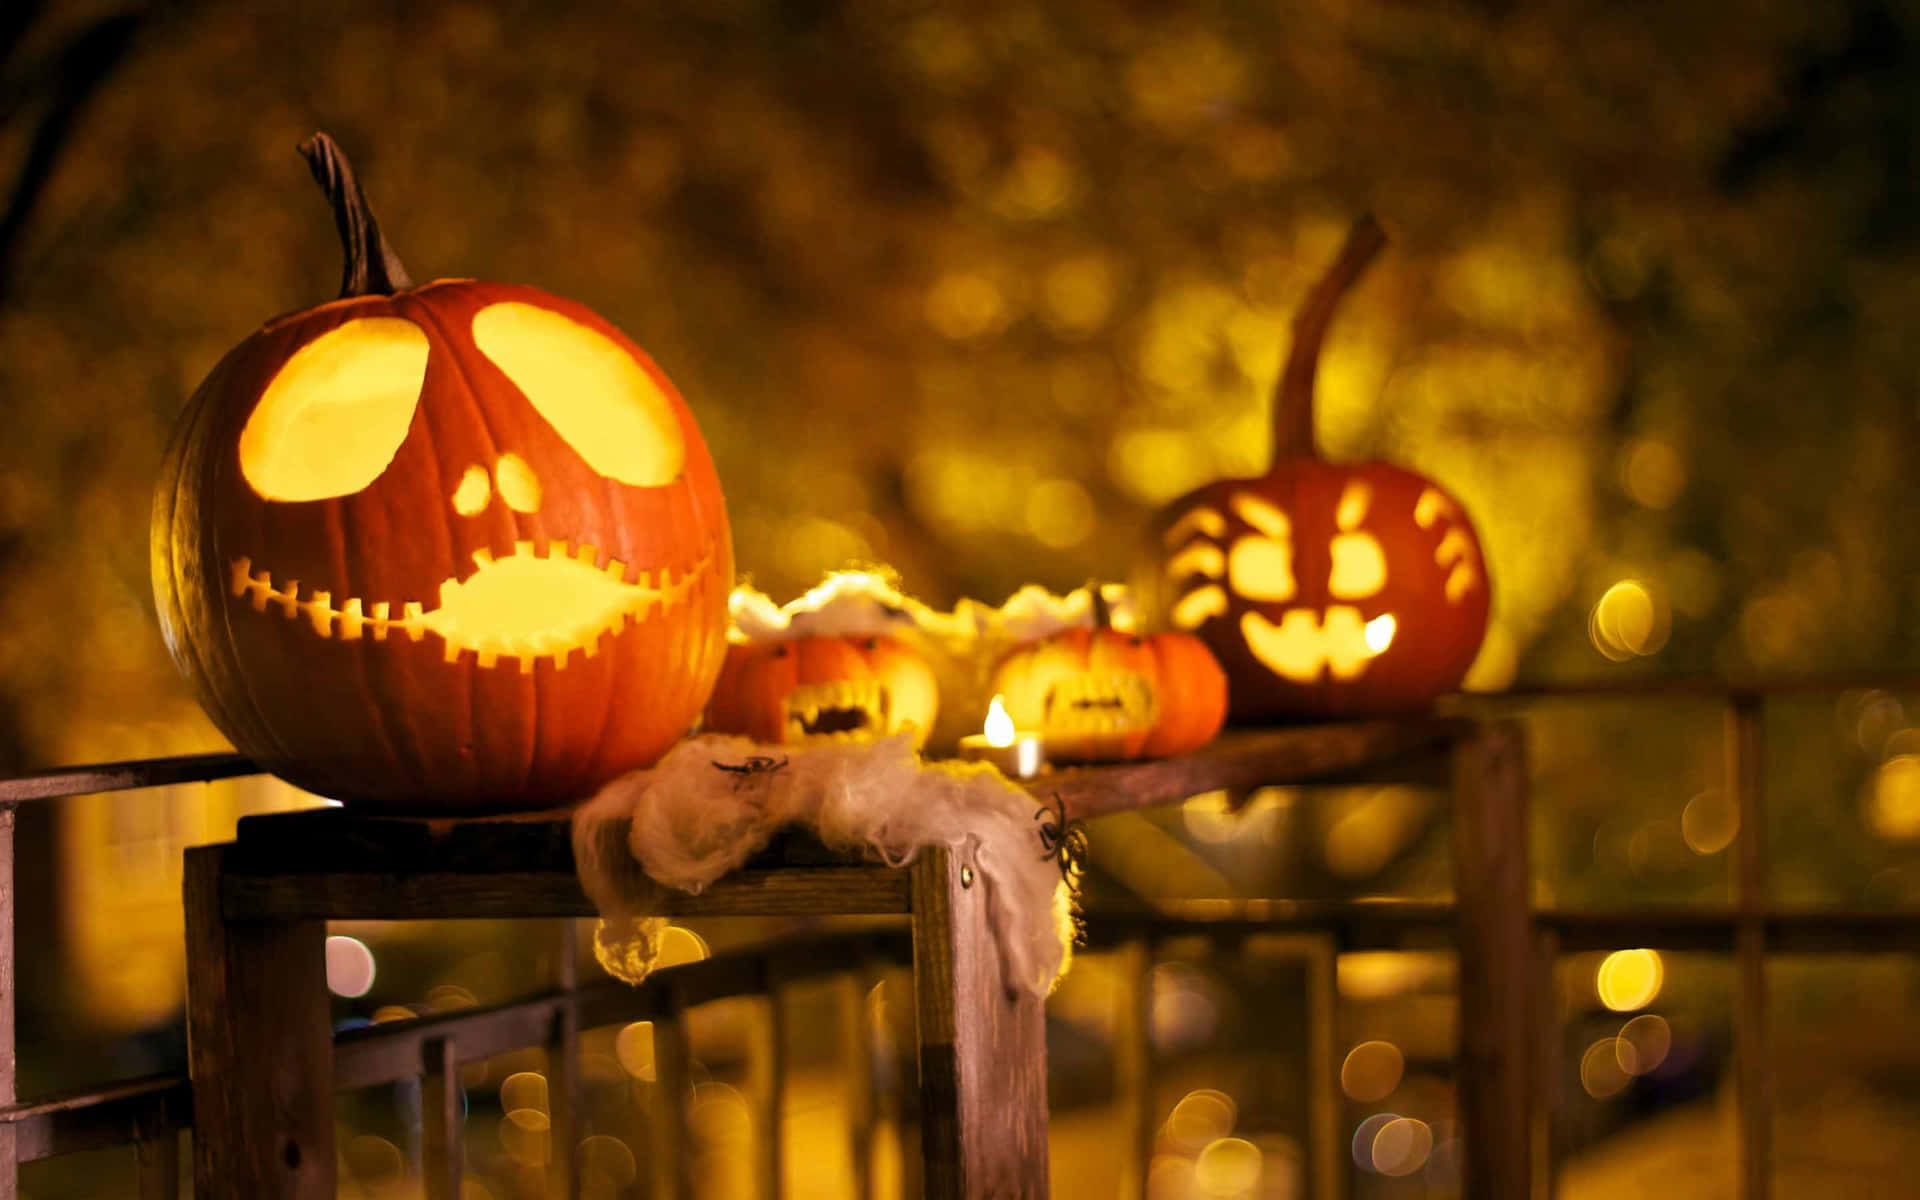 Get creative with your Halloween decorations this year! Wallpaper